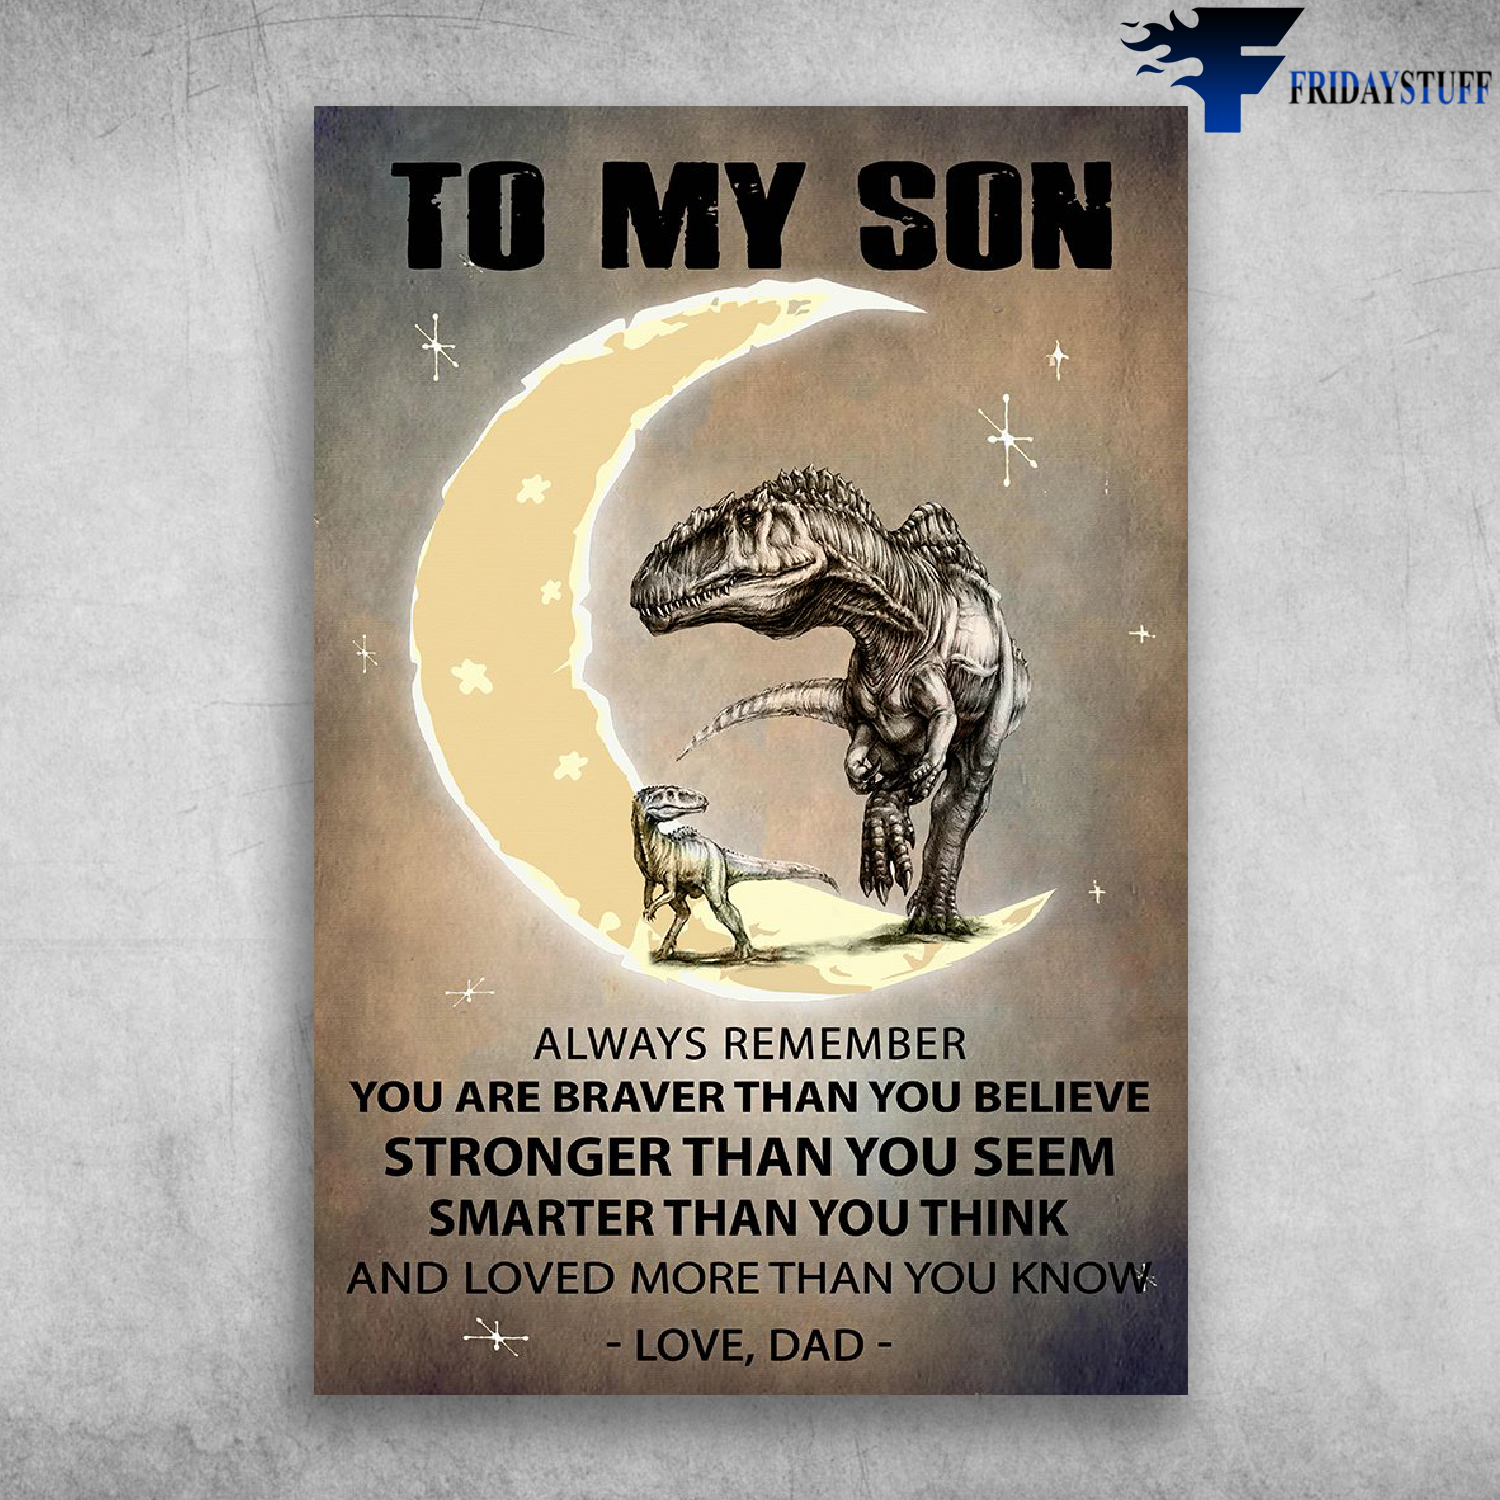 Father And Son Dinosaur T-rex Run On Moon - To My Son Always Remember You Are Braver Than You Believe